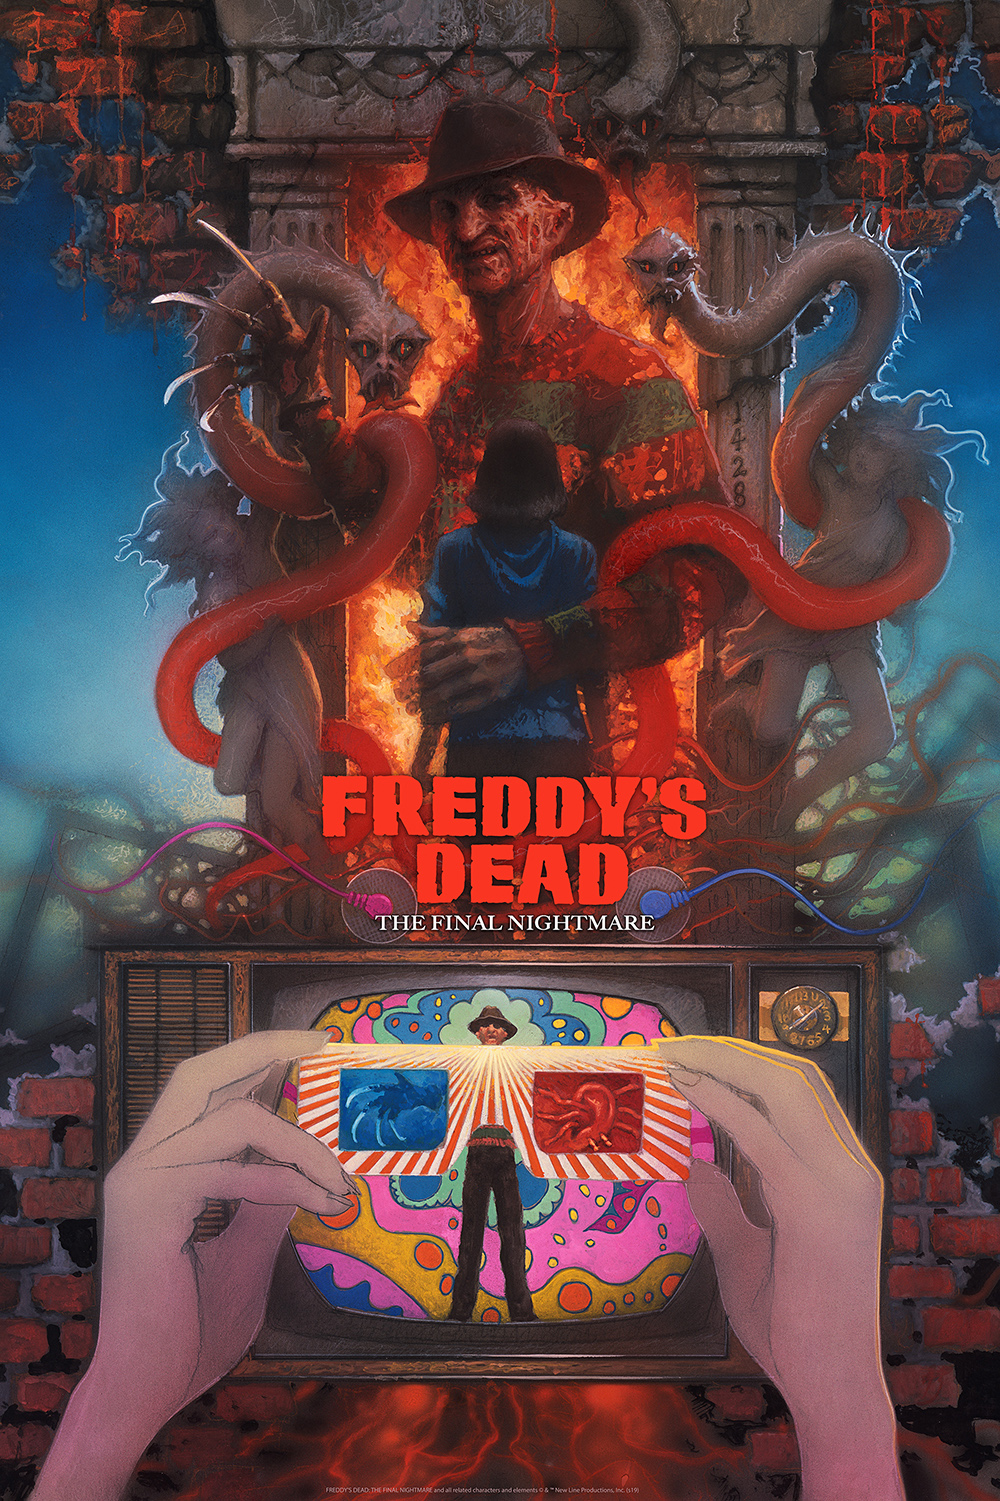 FREDDY'S DEAD The Final Nightmare – BNG print